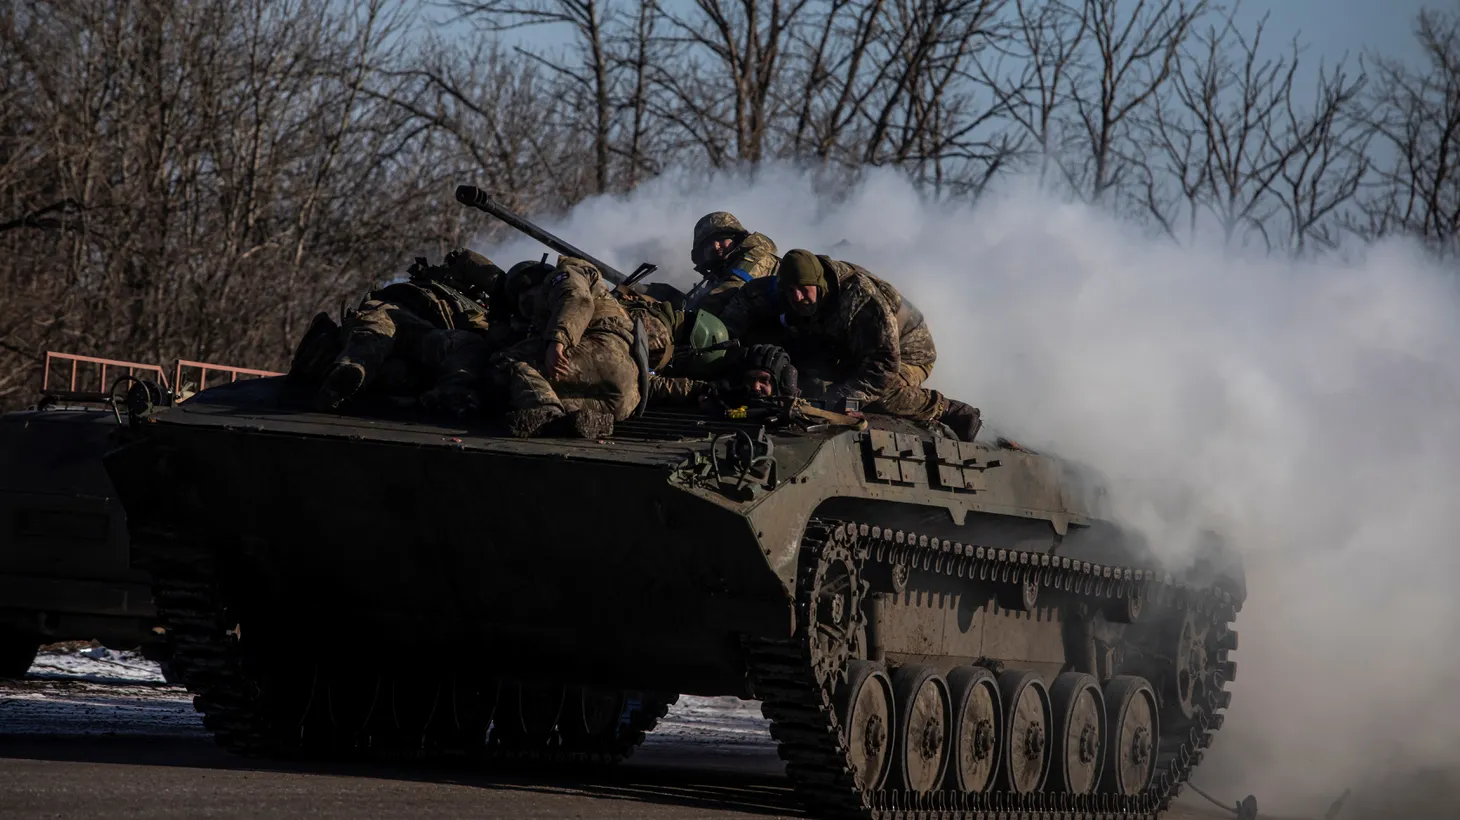 Ukrainian service members ride atop a BMP-2 infantry fighting vehicle near a frontline, amid Russia's attack on Ukraine, in Donetsk region, Ukraine, February 8, 2023.